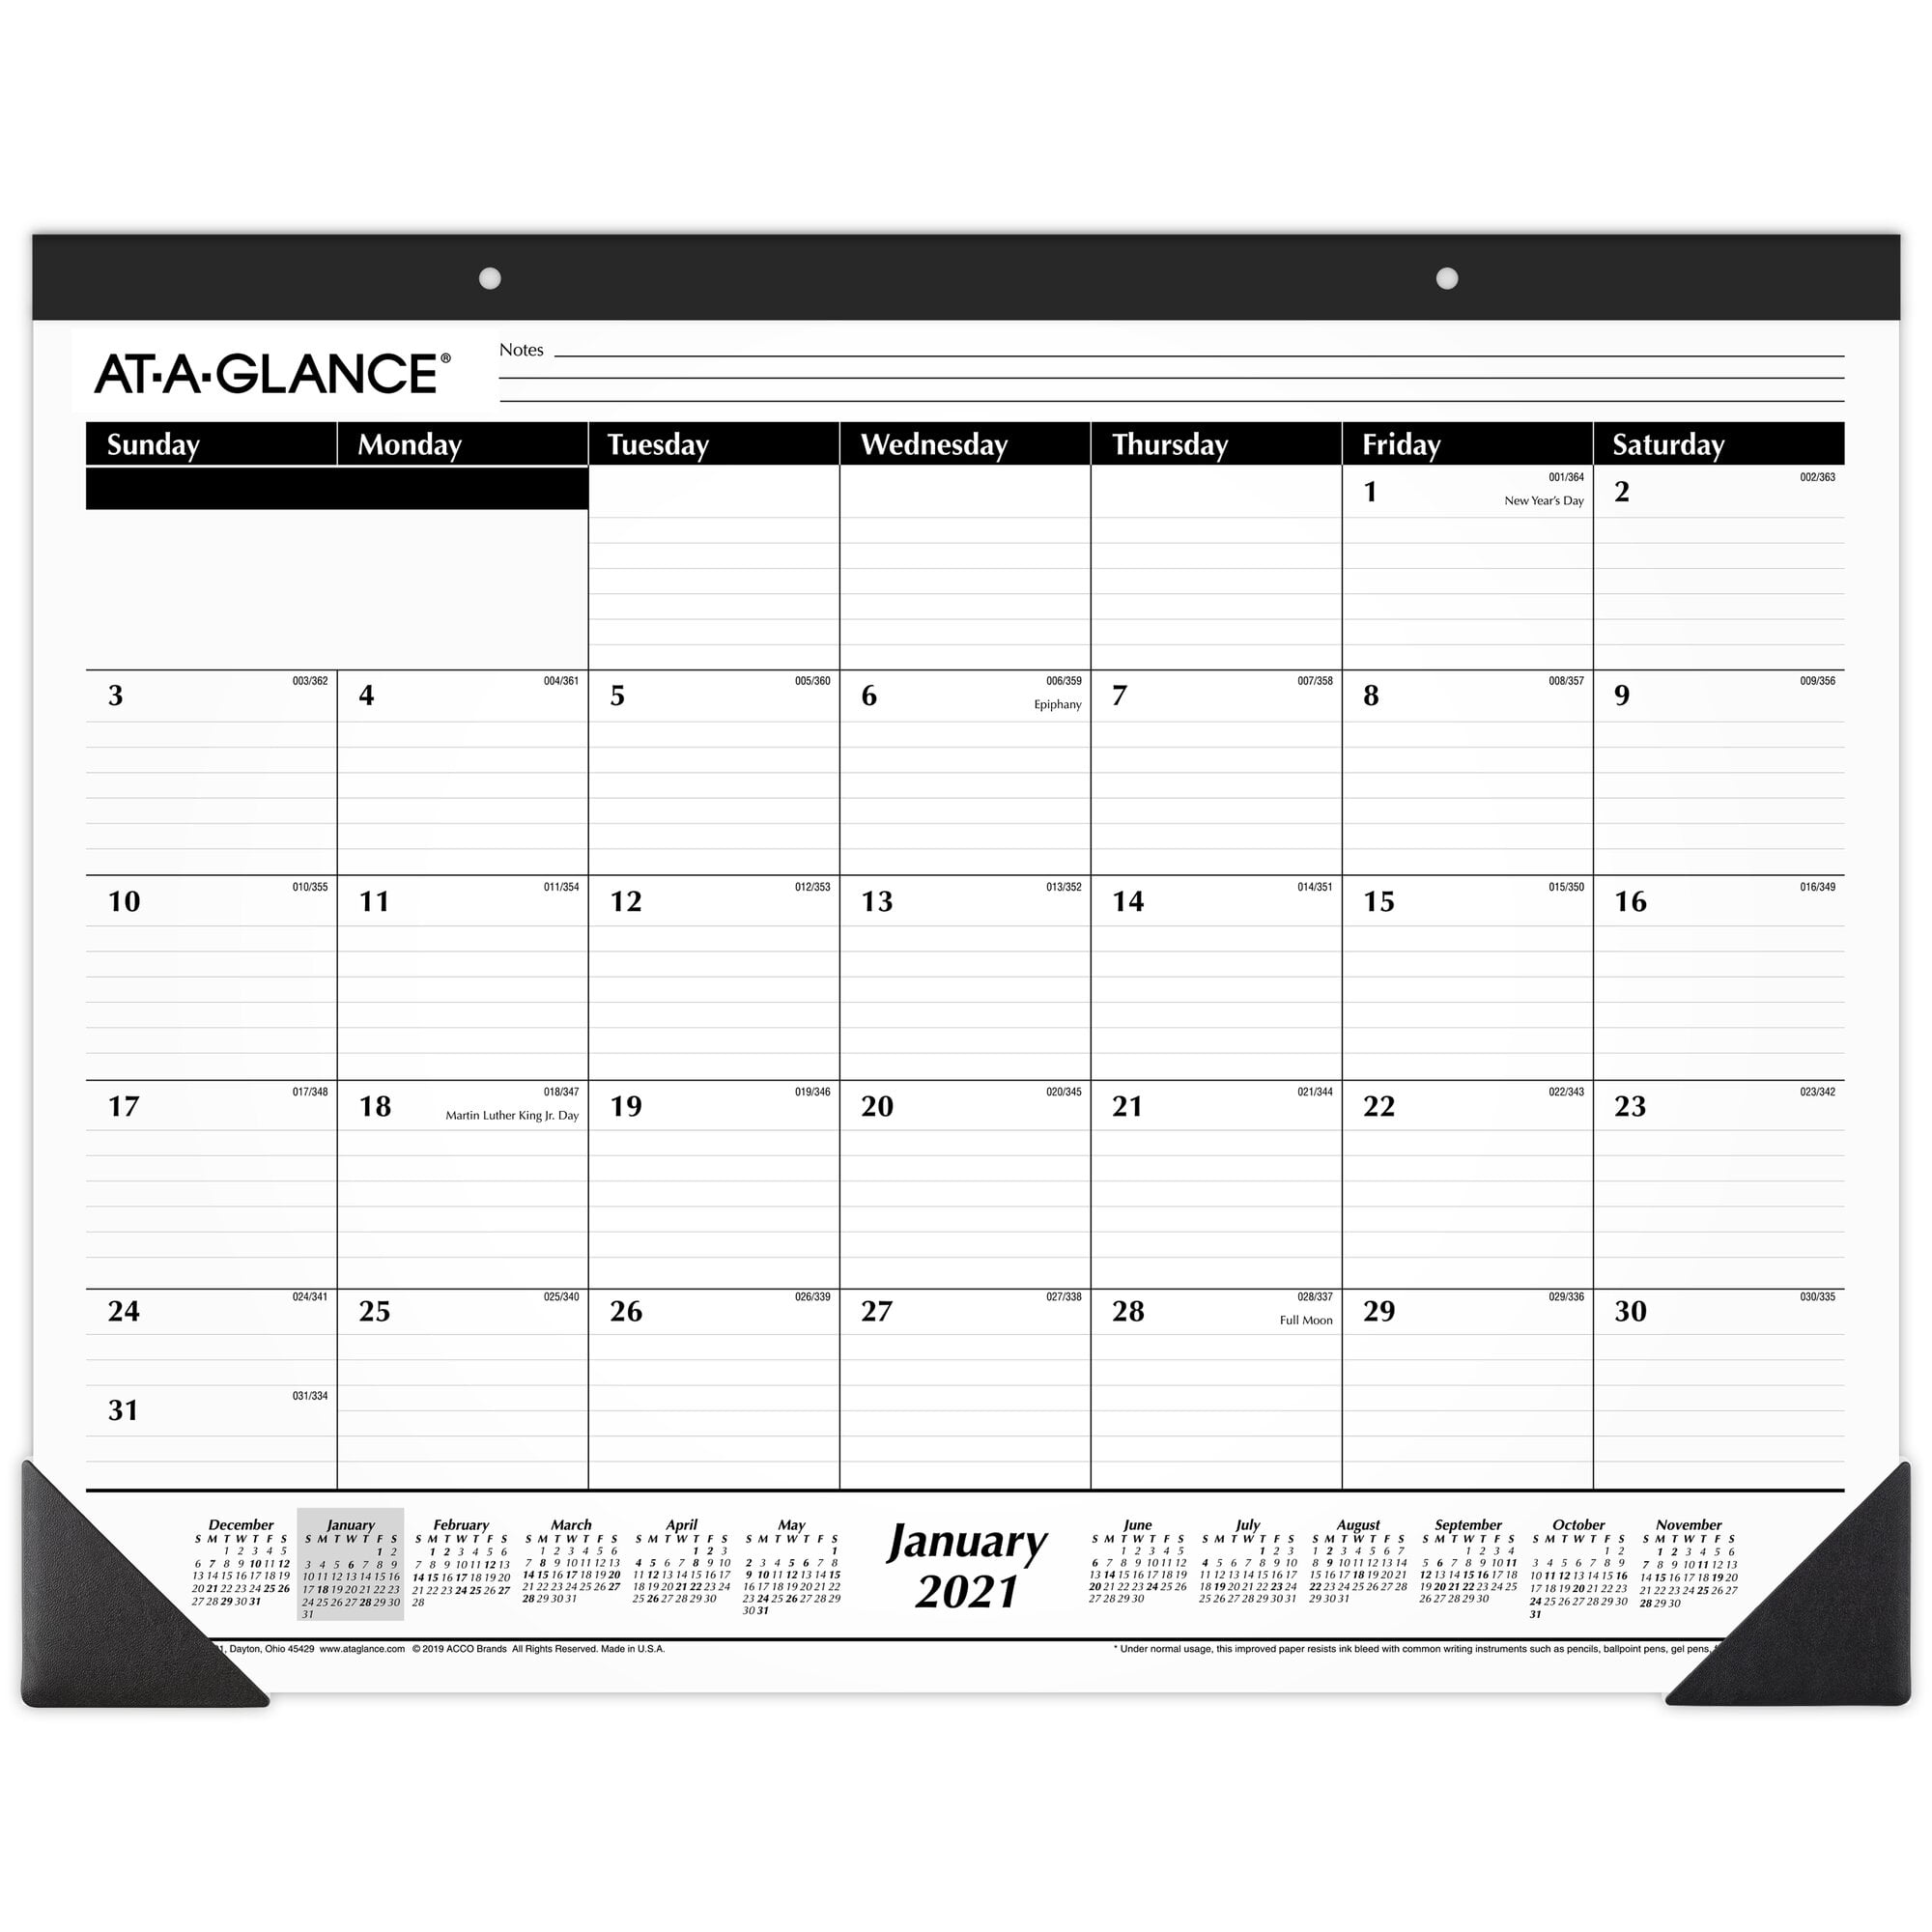 Monthly Wall Calendar/Desk Pad Planner for Office 16.8 X 11.8 Inches Runs from January 2020 to December 2020 Desk Calendar 2020 3 Pack School or Home